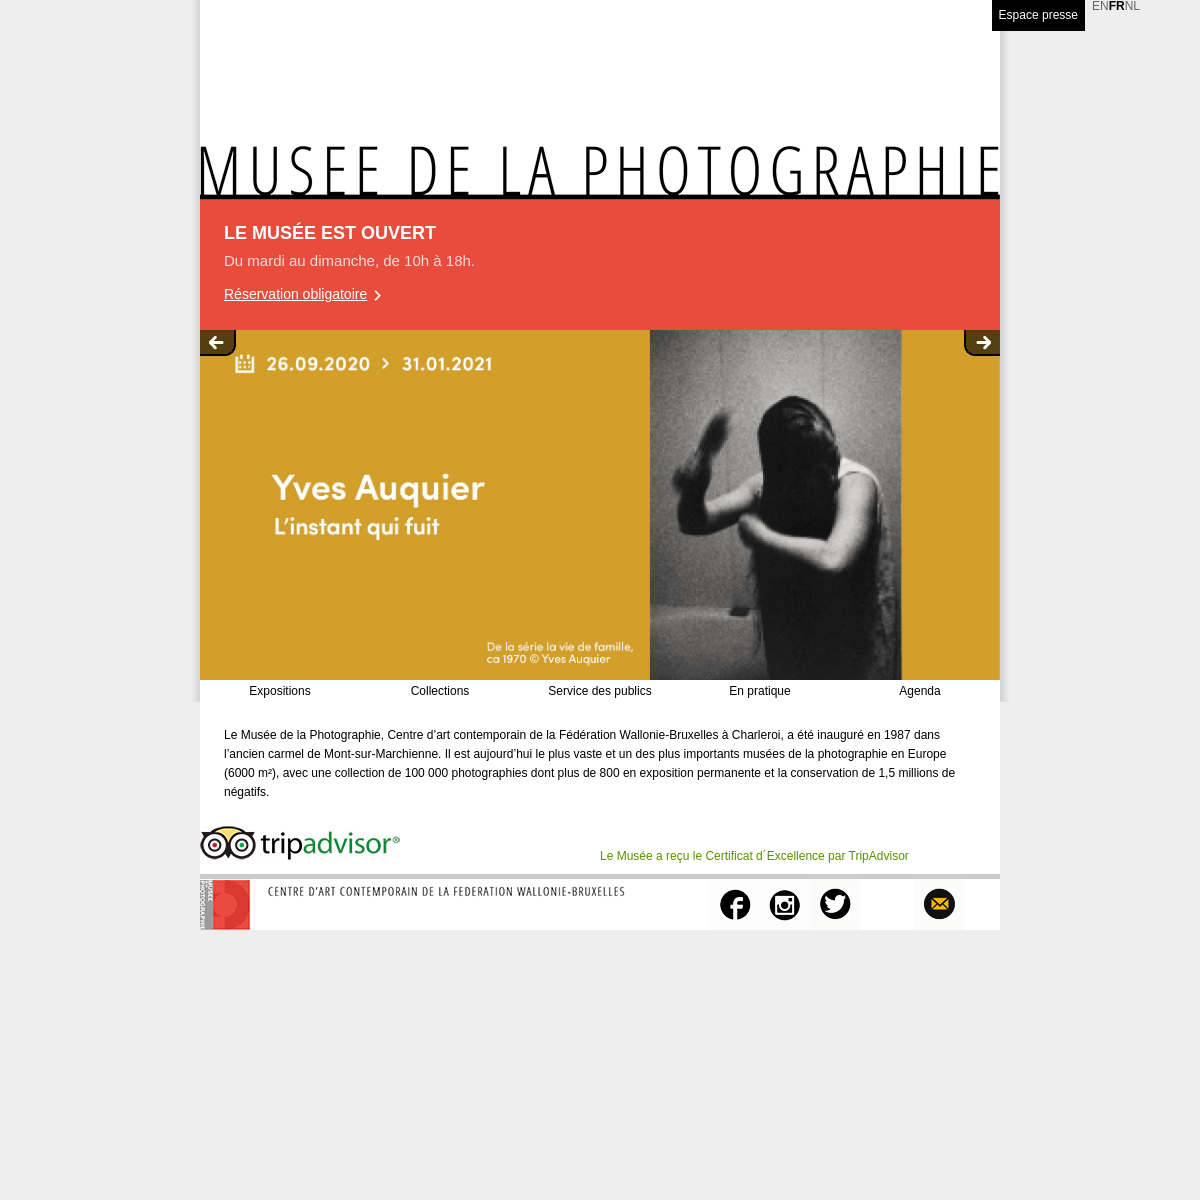 A complete backup of museephoto.be